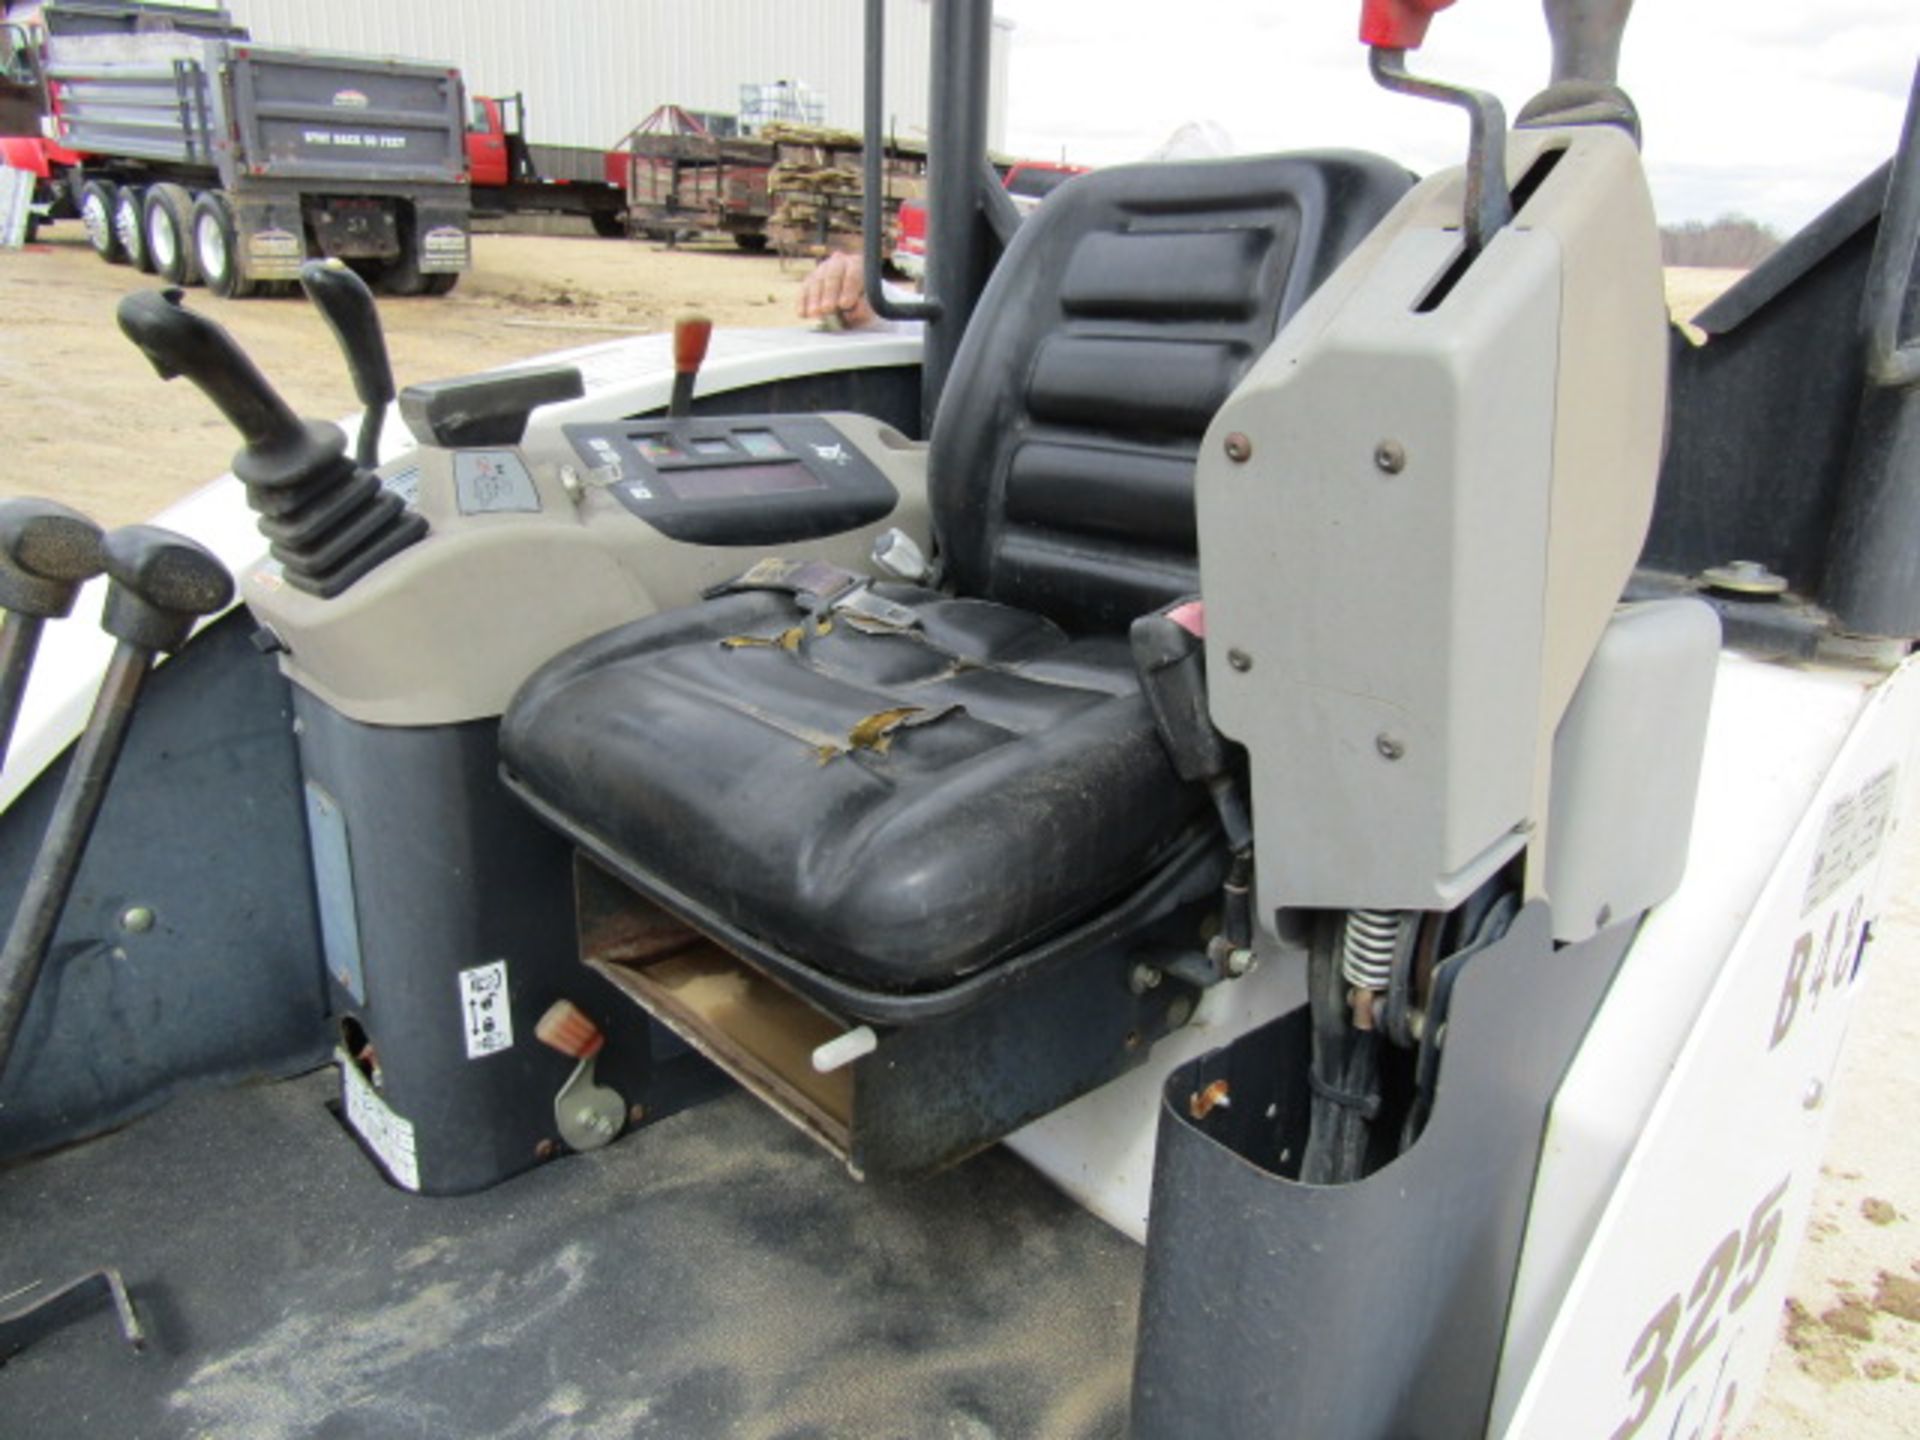 2006 Bobcat 325G Mini Track Hoe, Serial # 234113667, 2327 hours, Located in Hopkinton, IA - Image 8 of 15